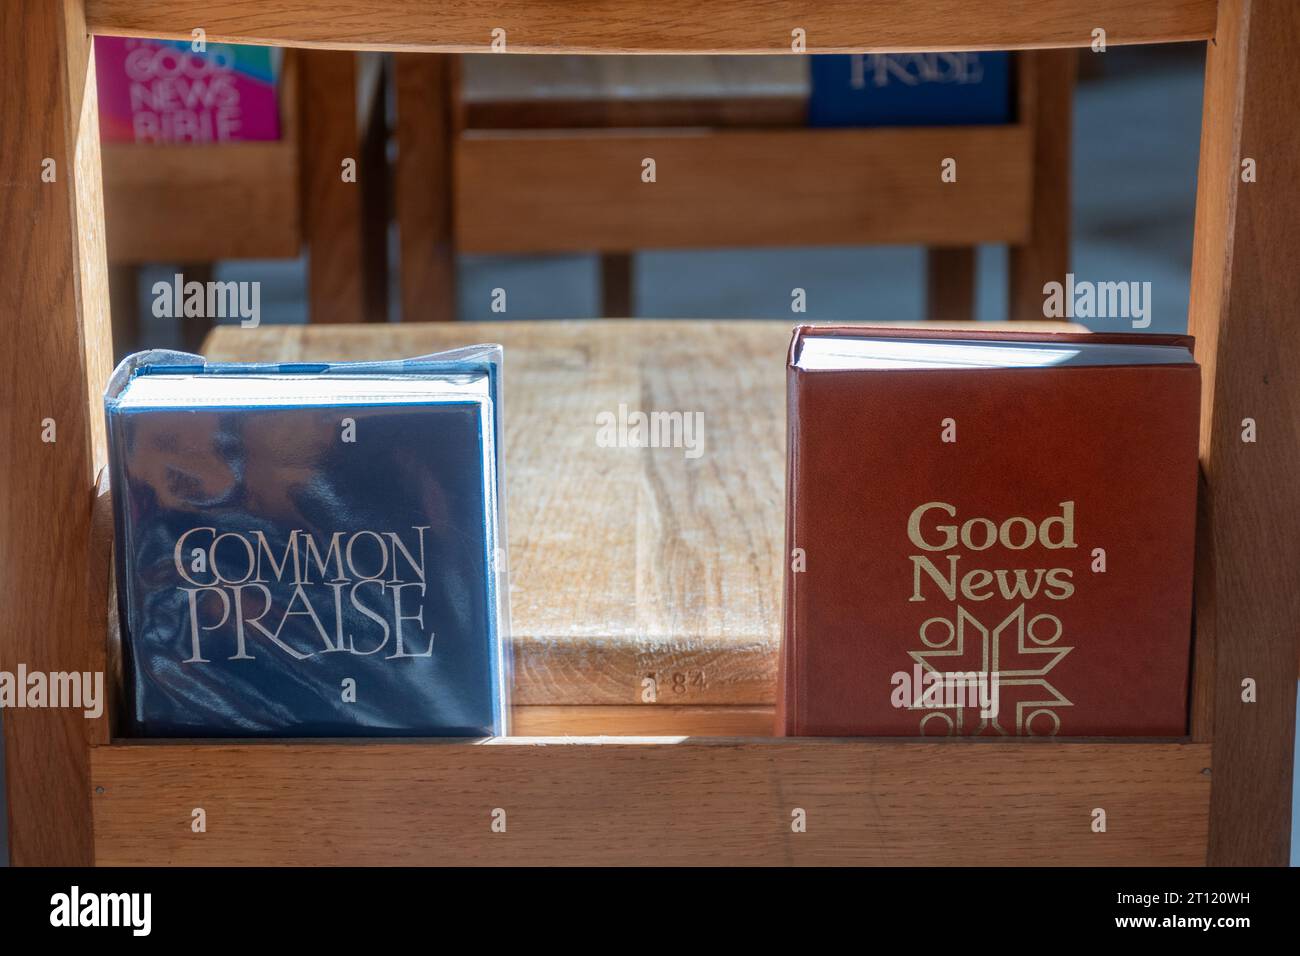 Common Praise hymn book and Good News Bible on church pews, UK Stock Photo